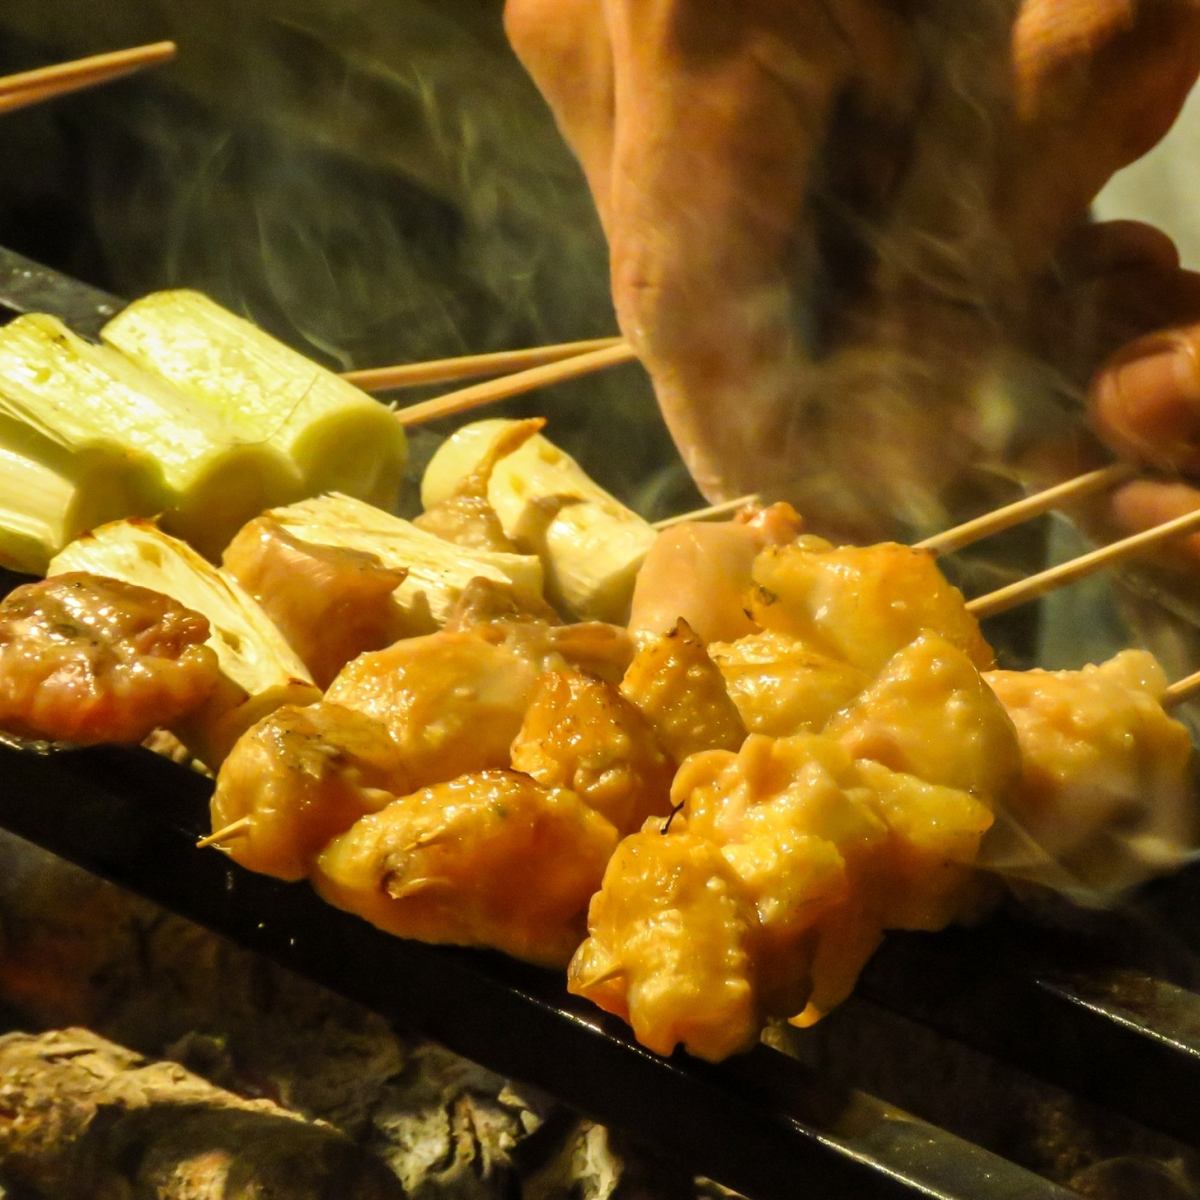 Demonstration at Tenmonkan ... skewer specialty shop "Tatori" boasted skewers, chicken sticks and egg dishes ★